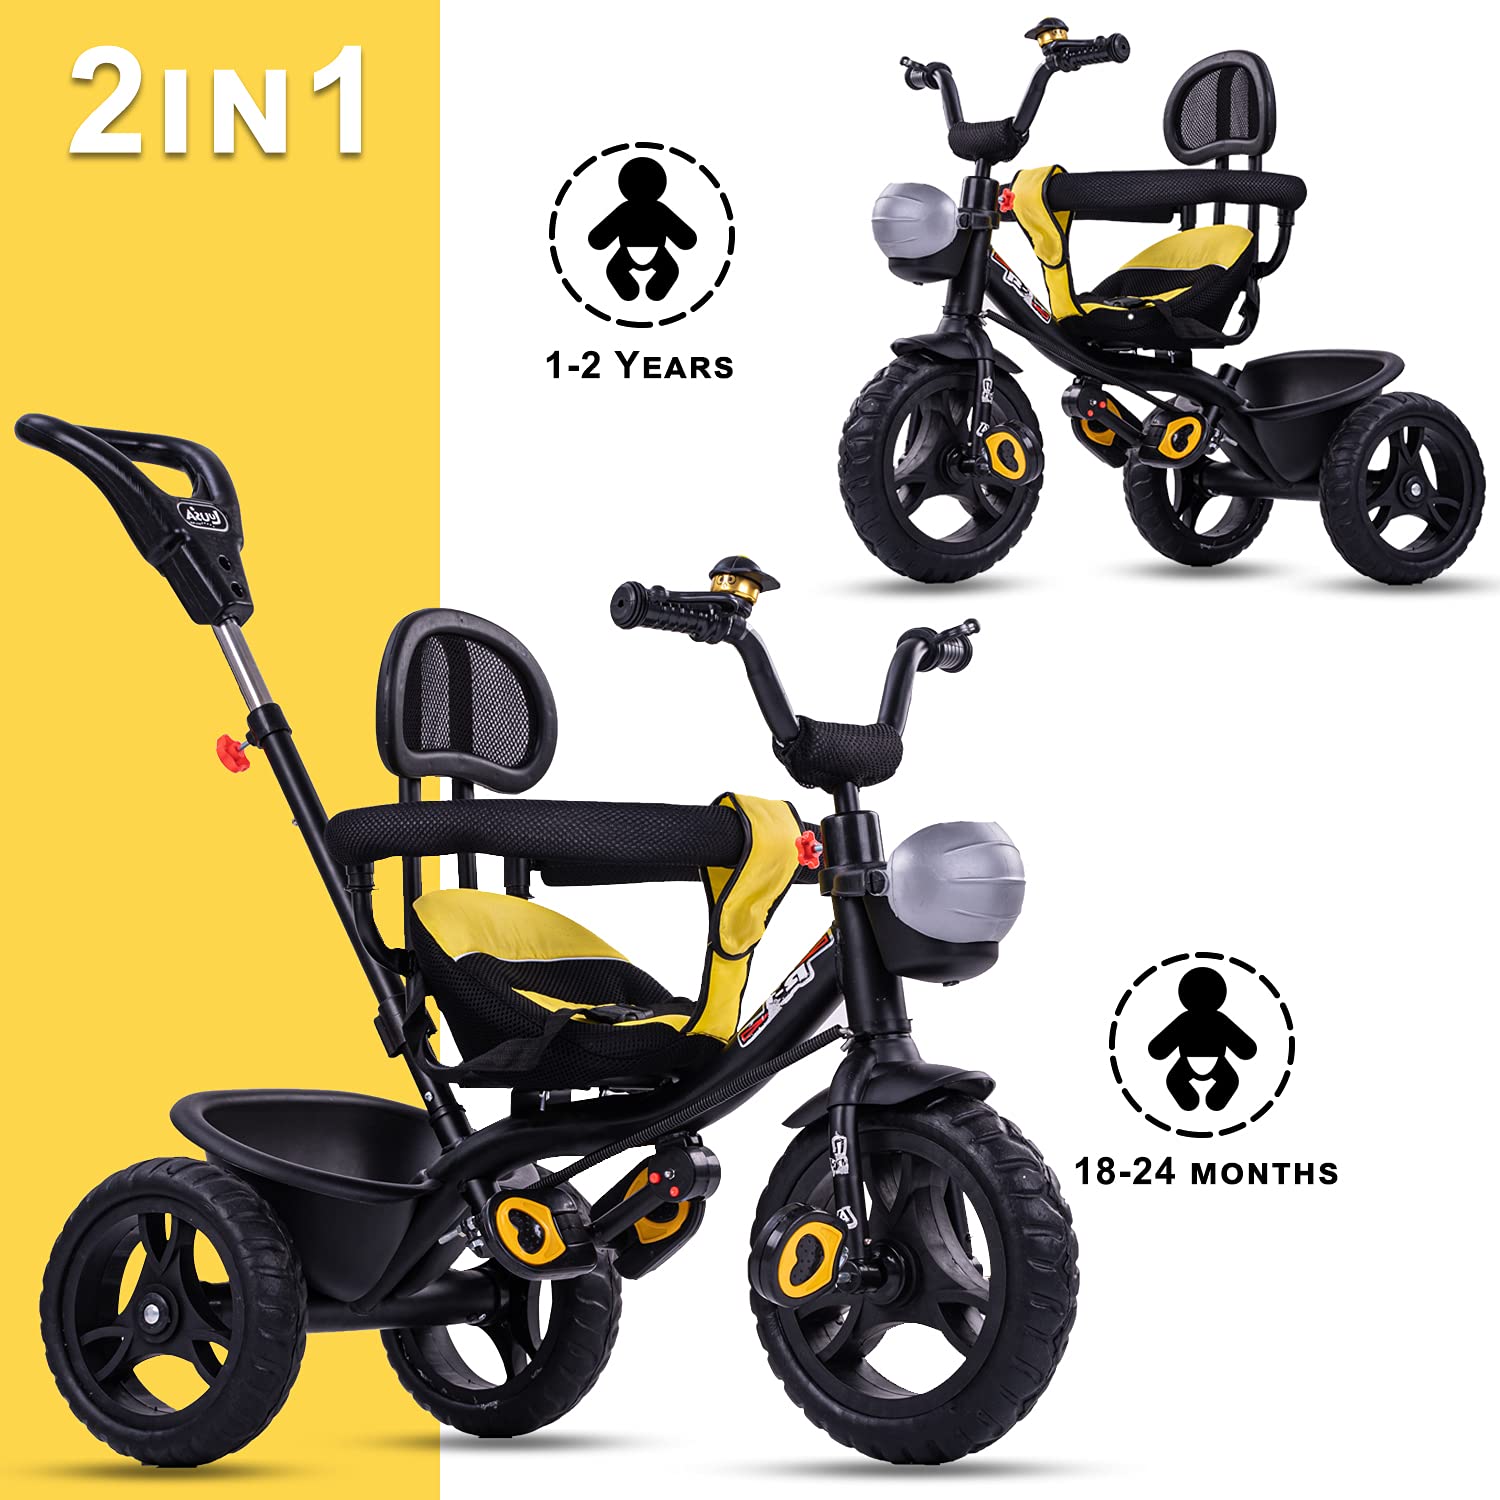 Luusa R1 Tricycle For Kids 3 In 1 Baby Tricycle For 1 - 4 Years Kids Carrying Capacity Upto 30kgs (Yellow)